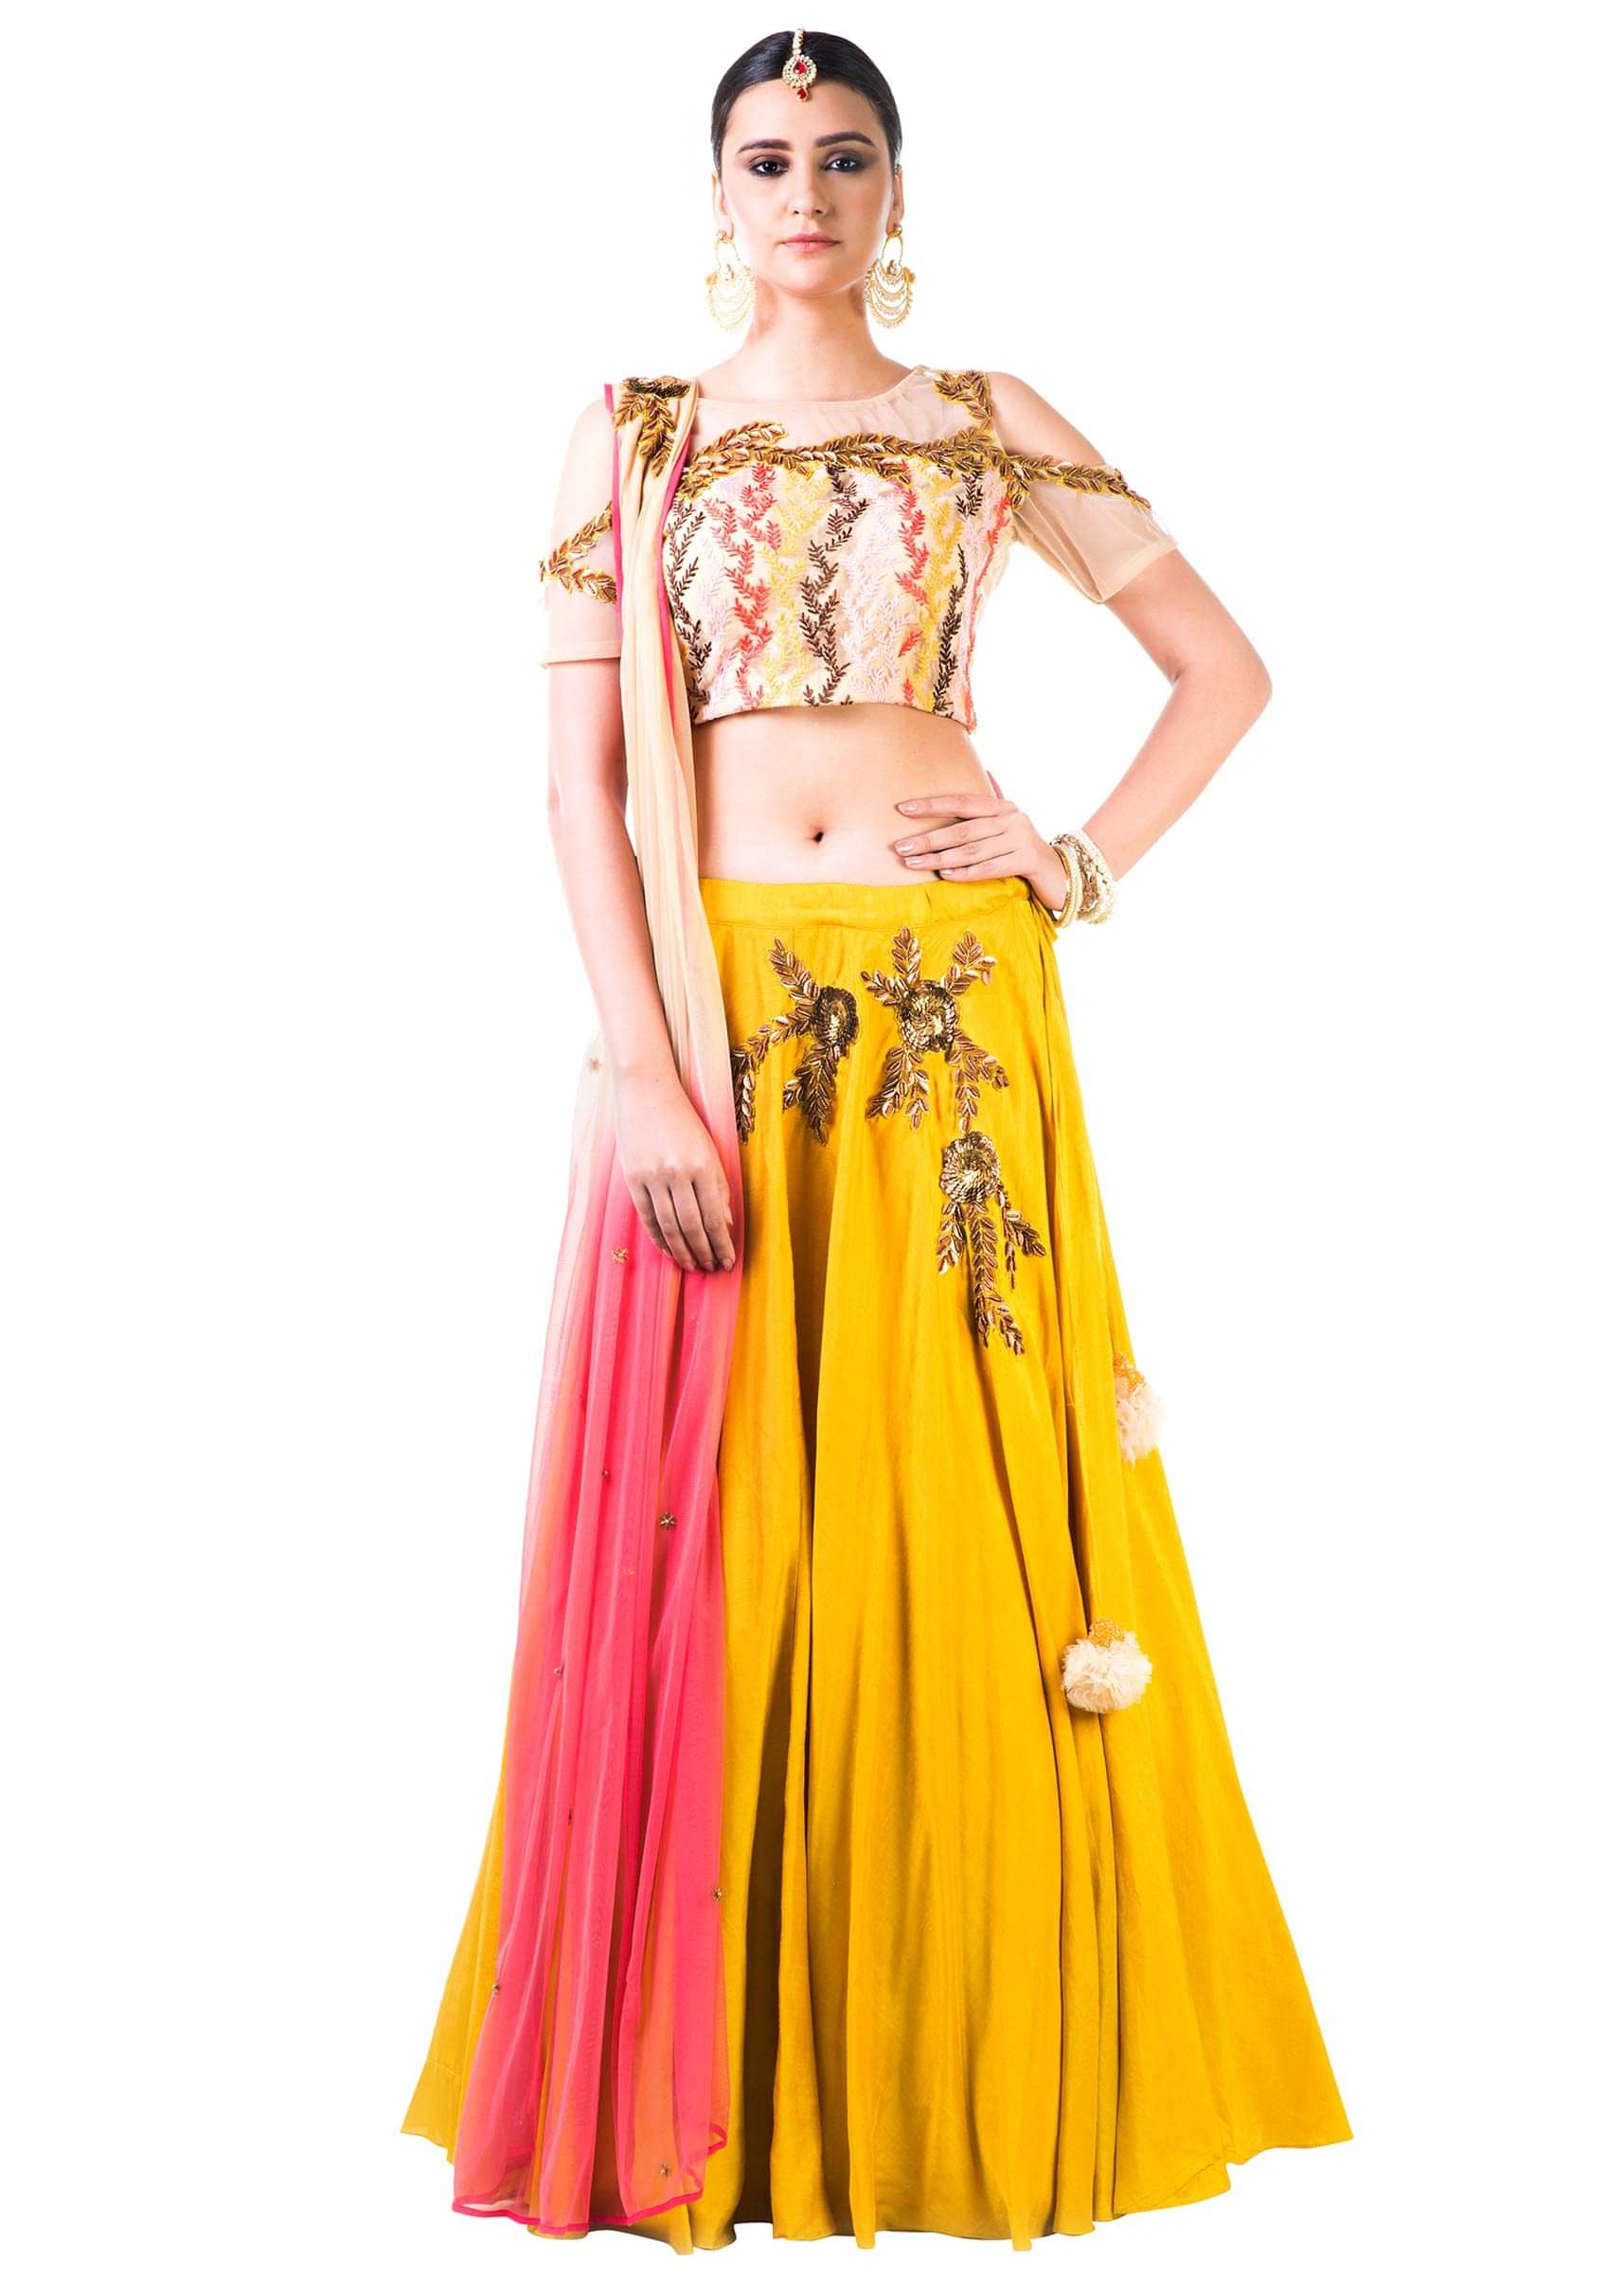 Mustard Yellow Lehenga With An Embroidered Beige Blouse And Shaded Dupatta Online - Kalki Fashion